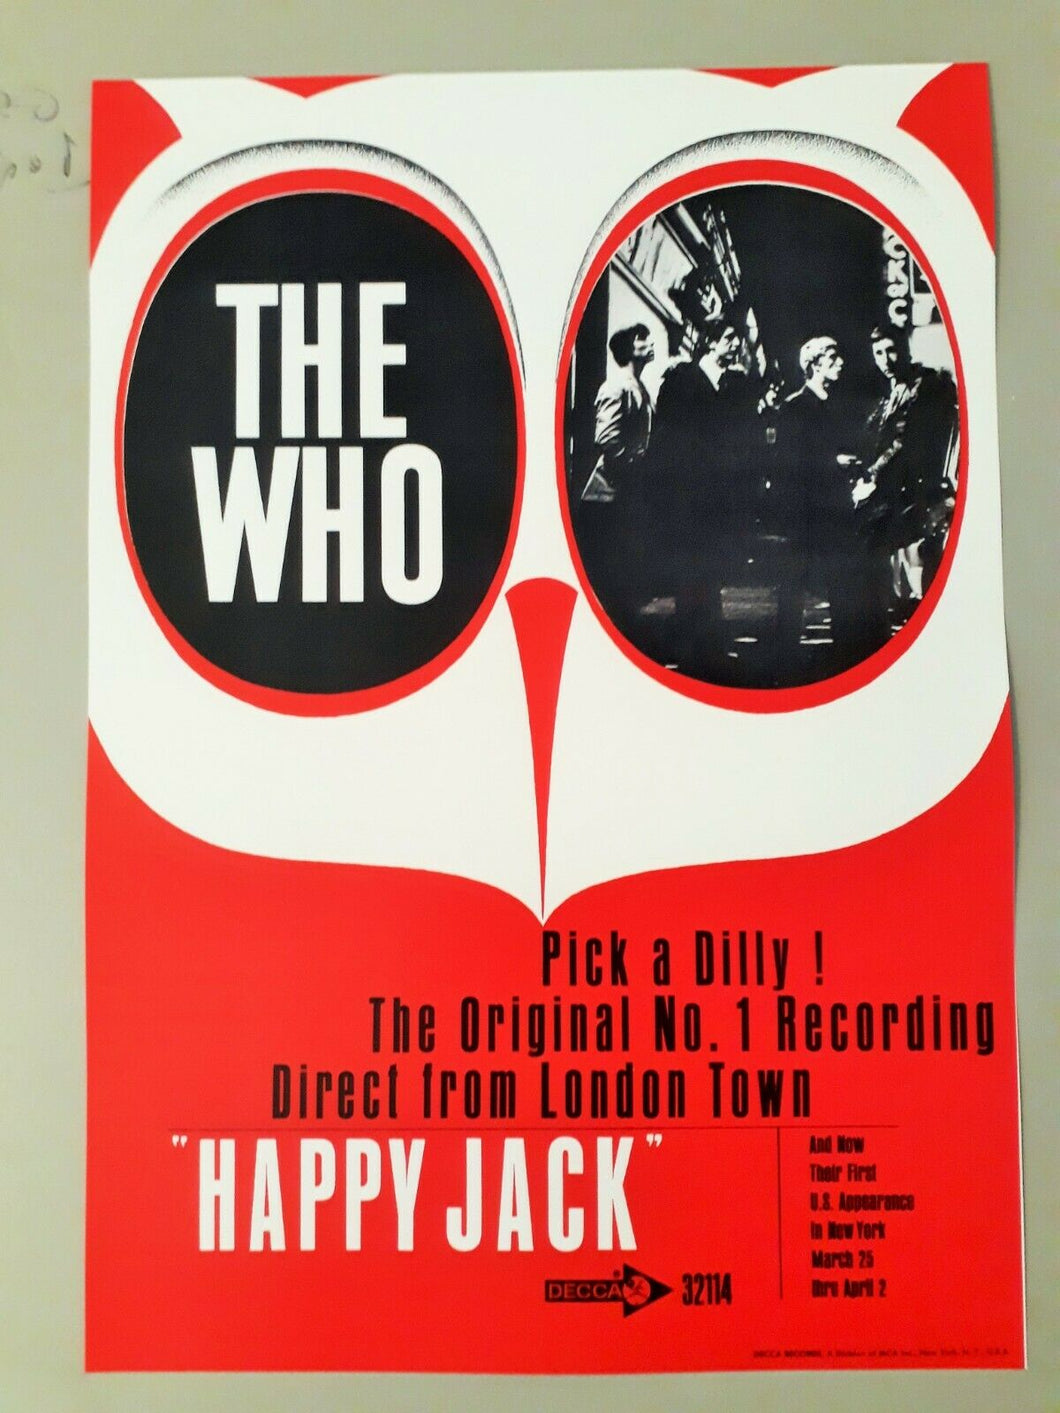 The Who promotional poster - Happy Jack USA Decca 1967 new reprinted edition A3 - Original Music and Movie Posters for sale from Bamalama - Online Poster Store UK London